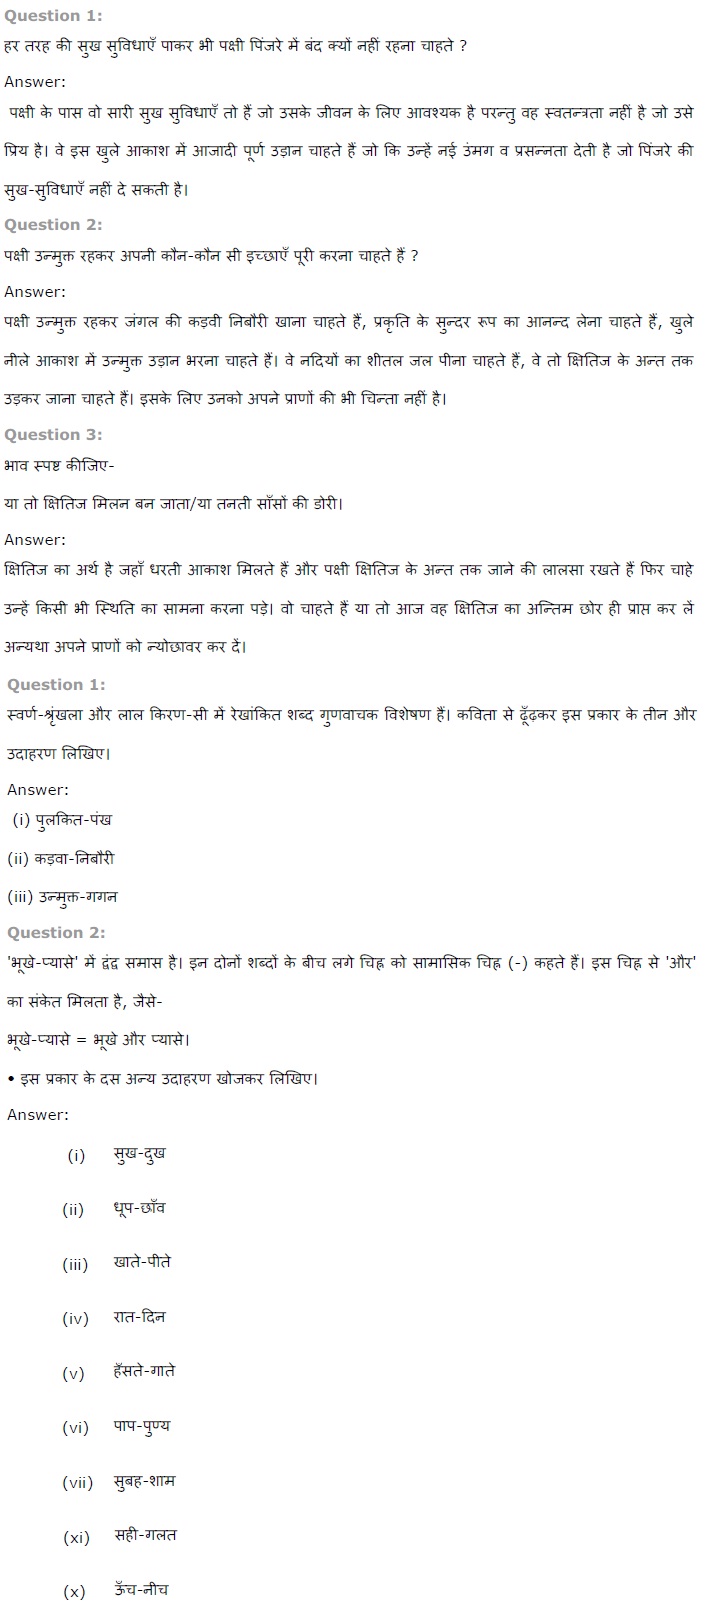 NCERT Solutions for Class 7 Hindi Chapter 1 हम पंछी उन्मुक्त गगन के PDF Download